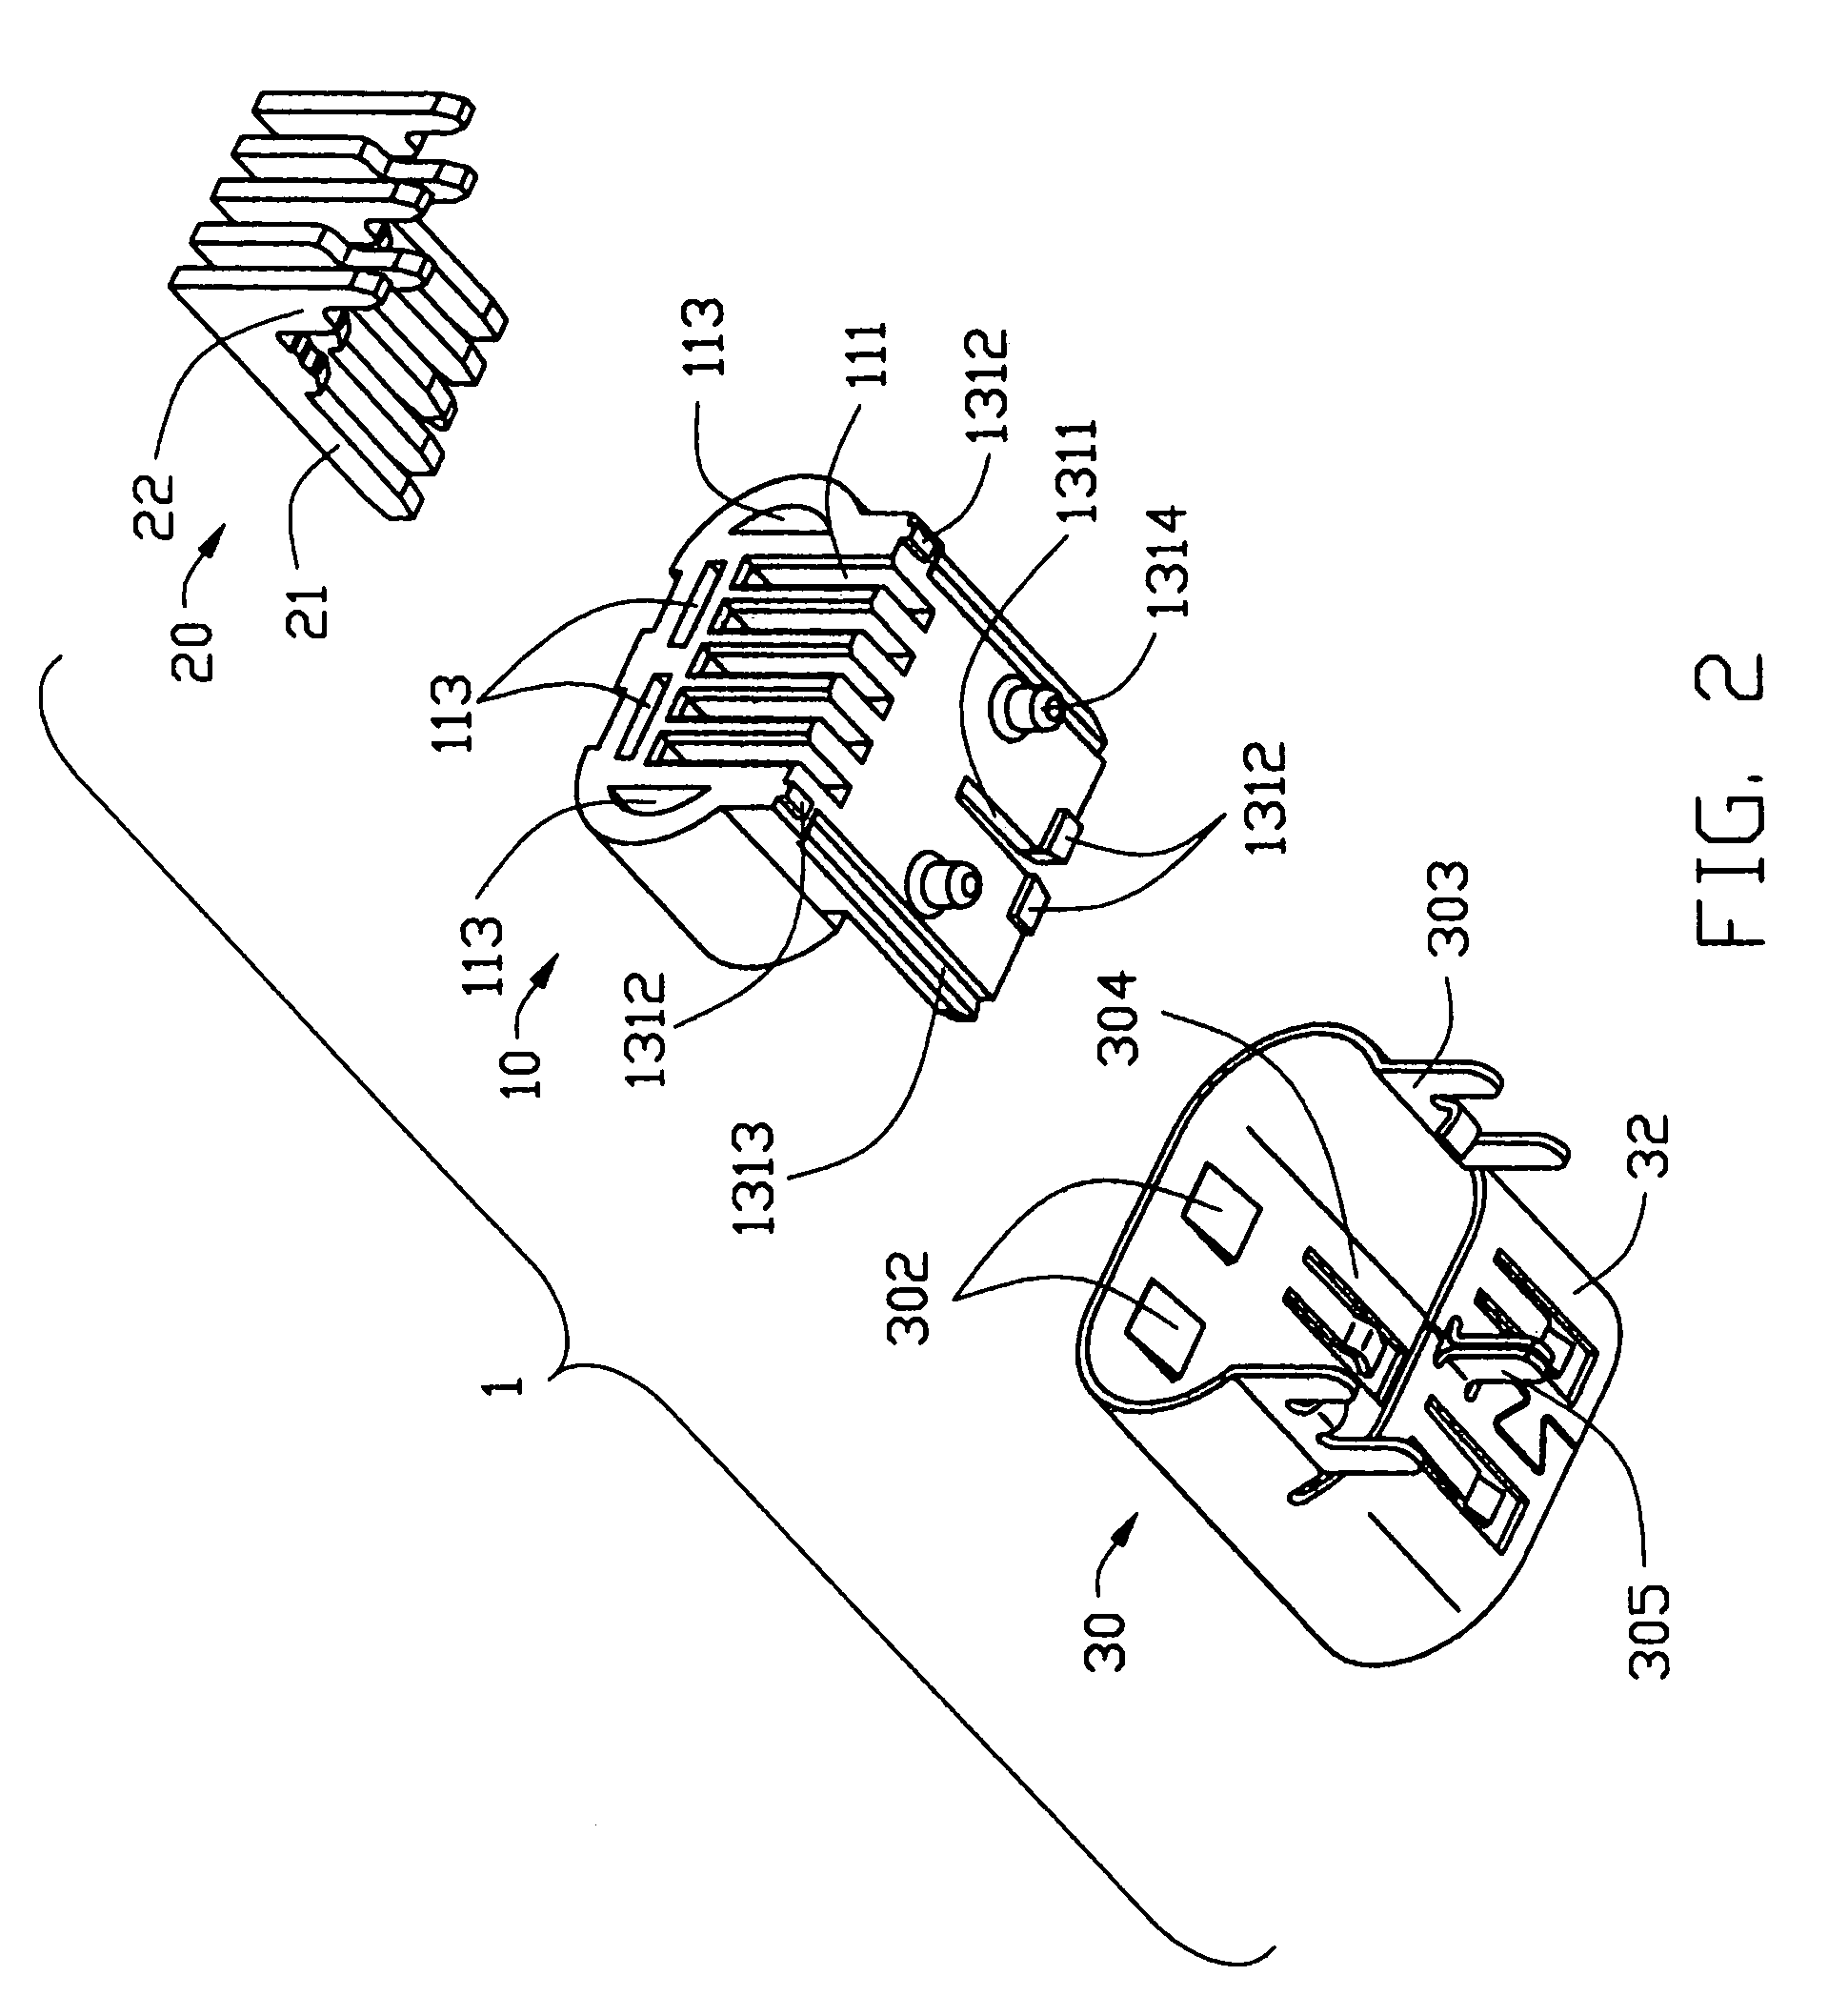 Electrical connector having improved structure regarding terminals